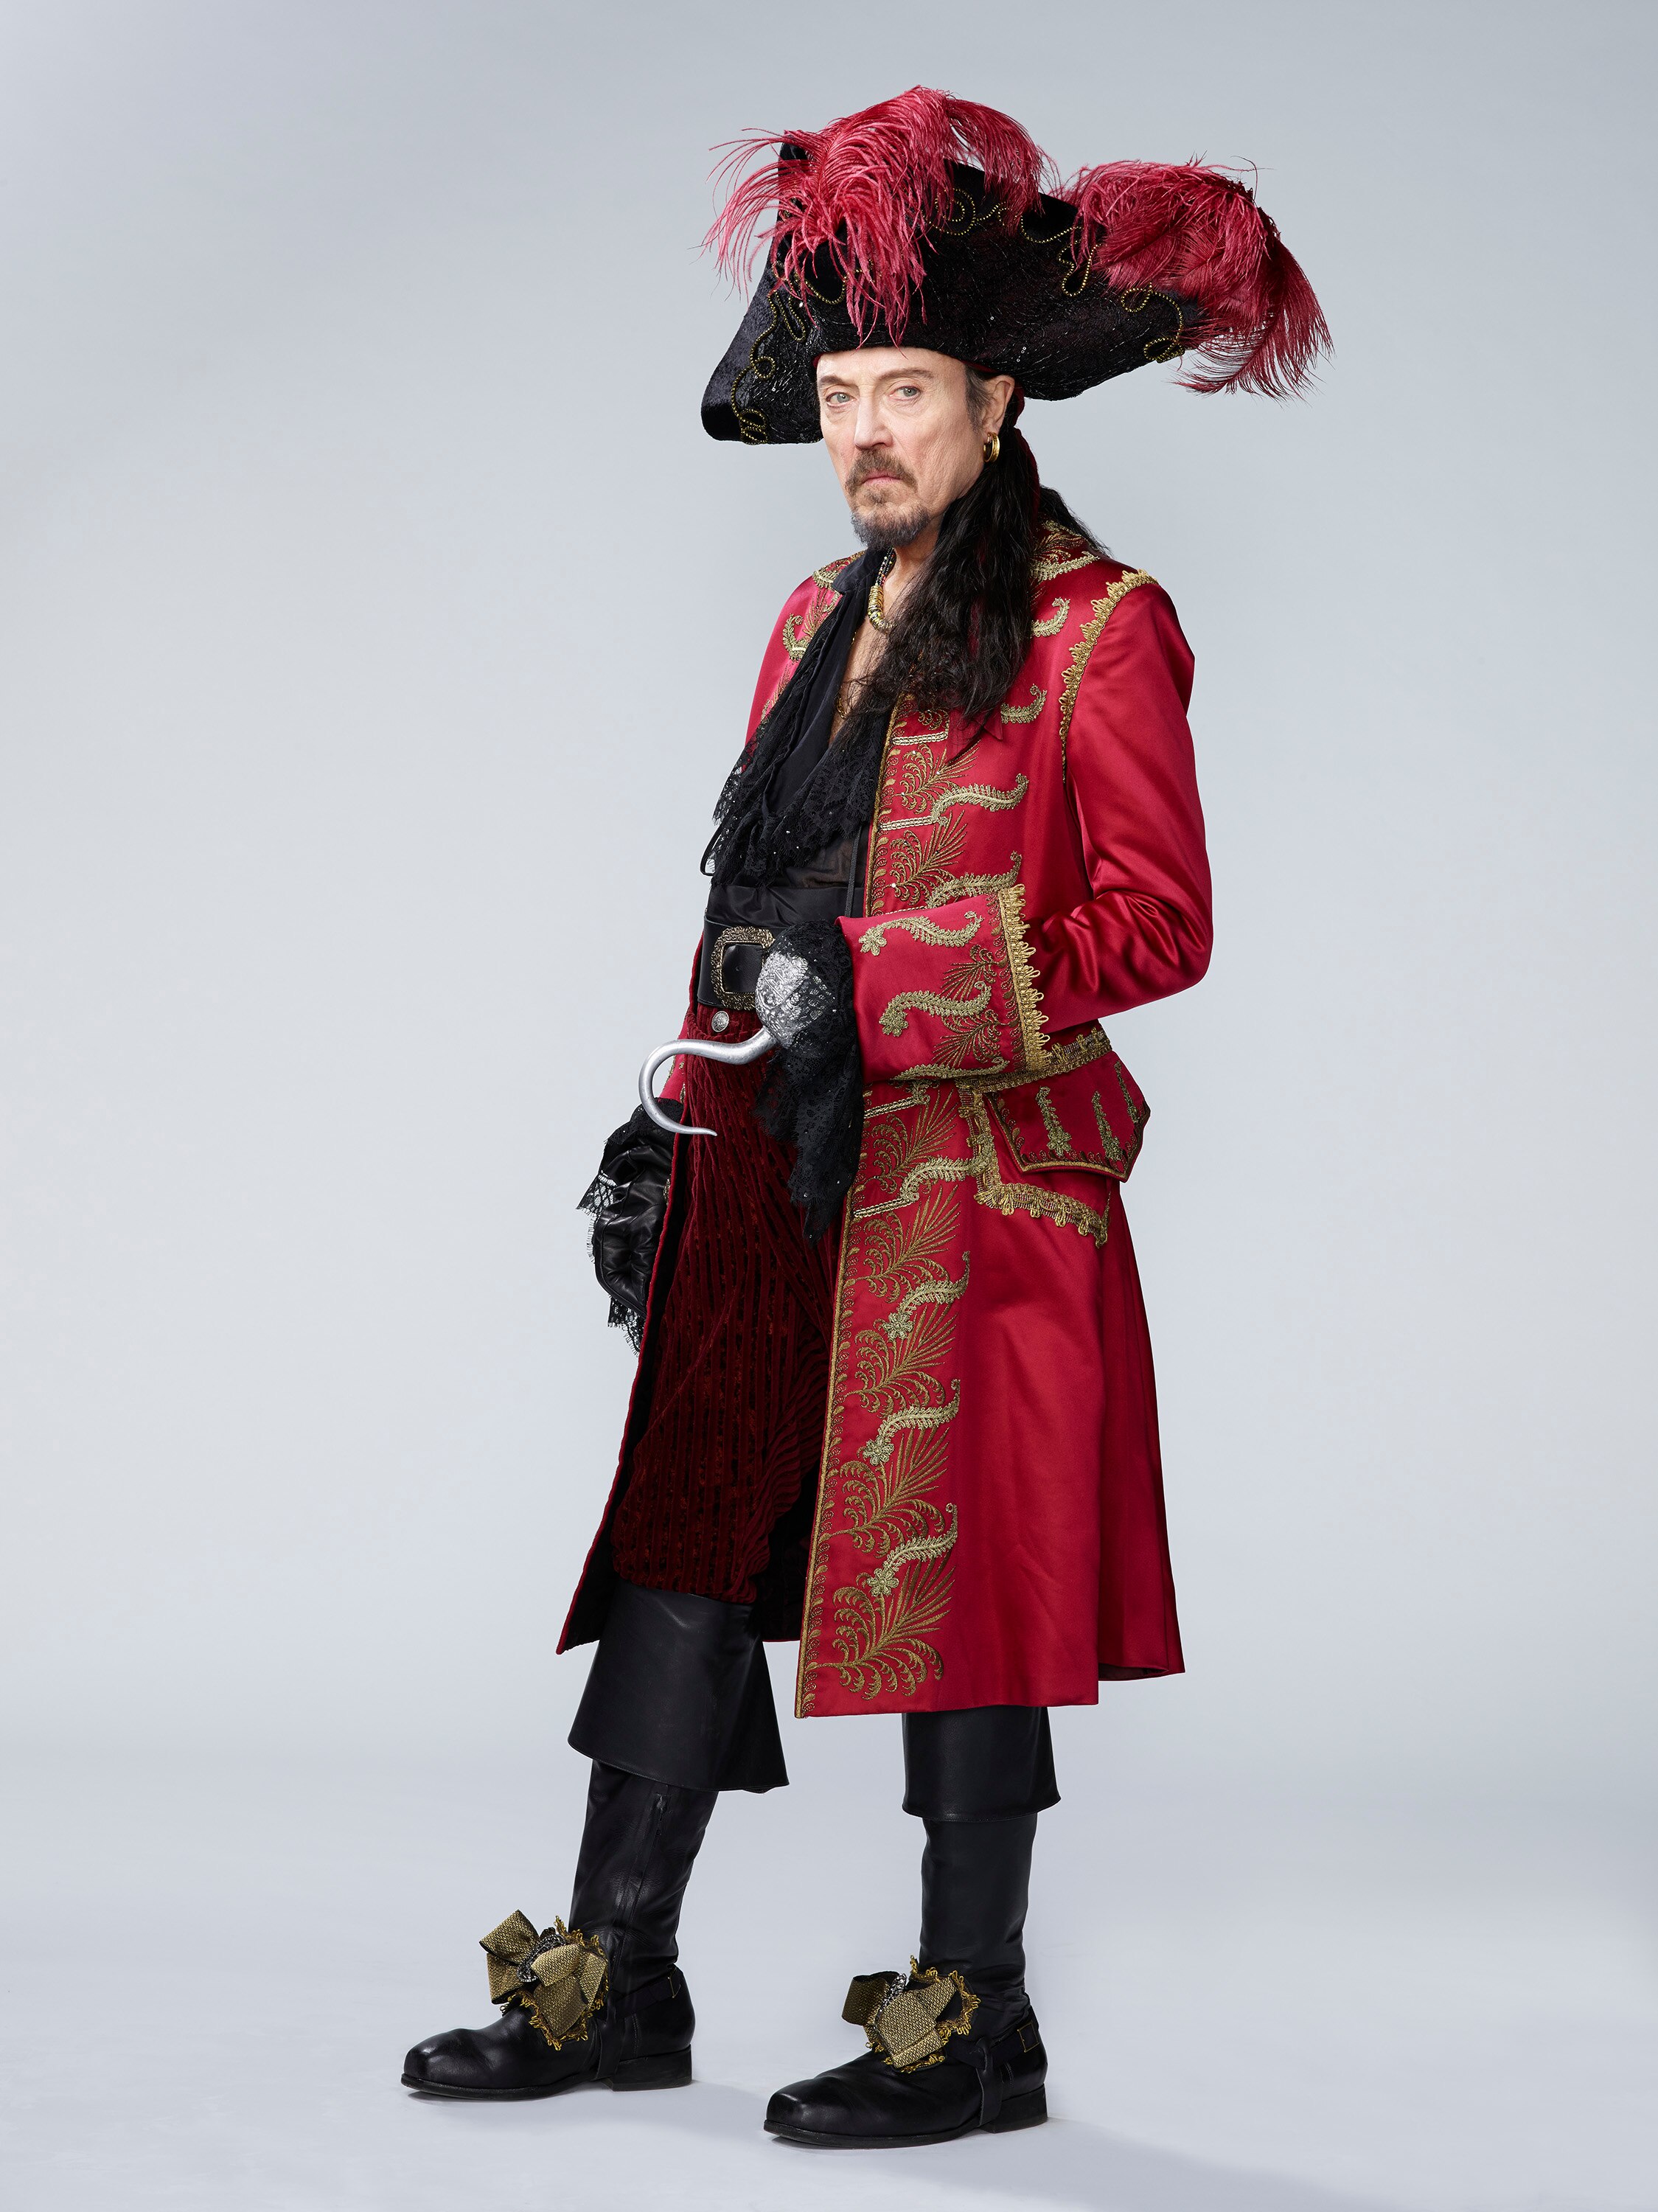 Peter Pan LIVE!: Meet the Characters of Peter Pan Live! Photo: 2080191 ...